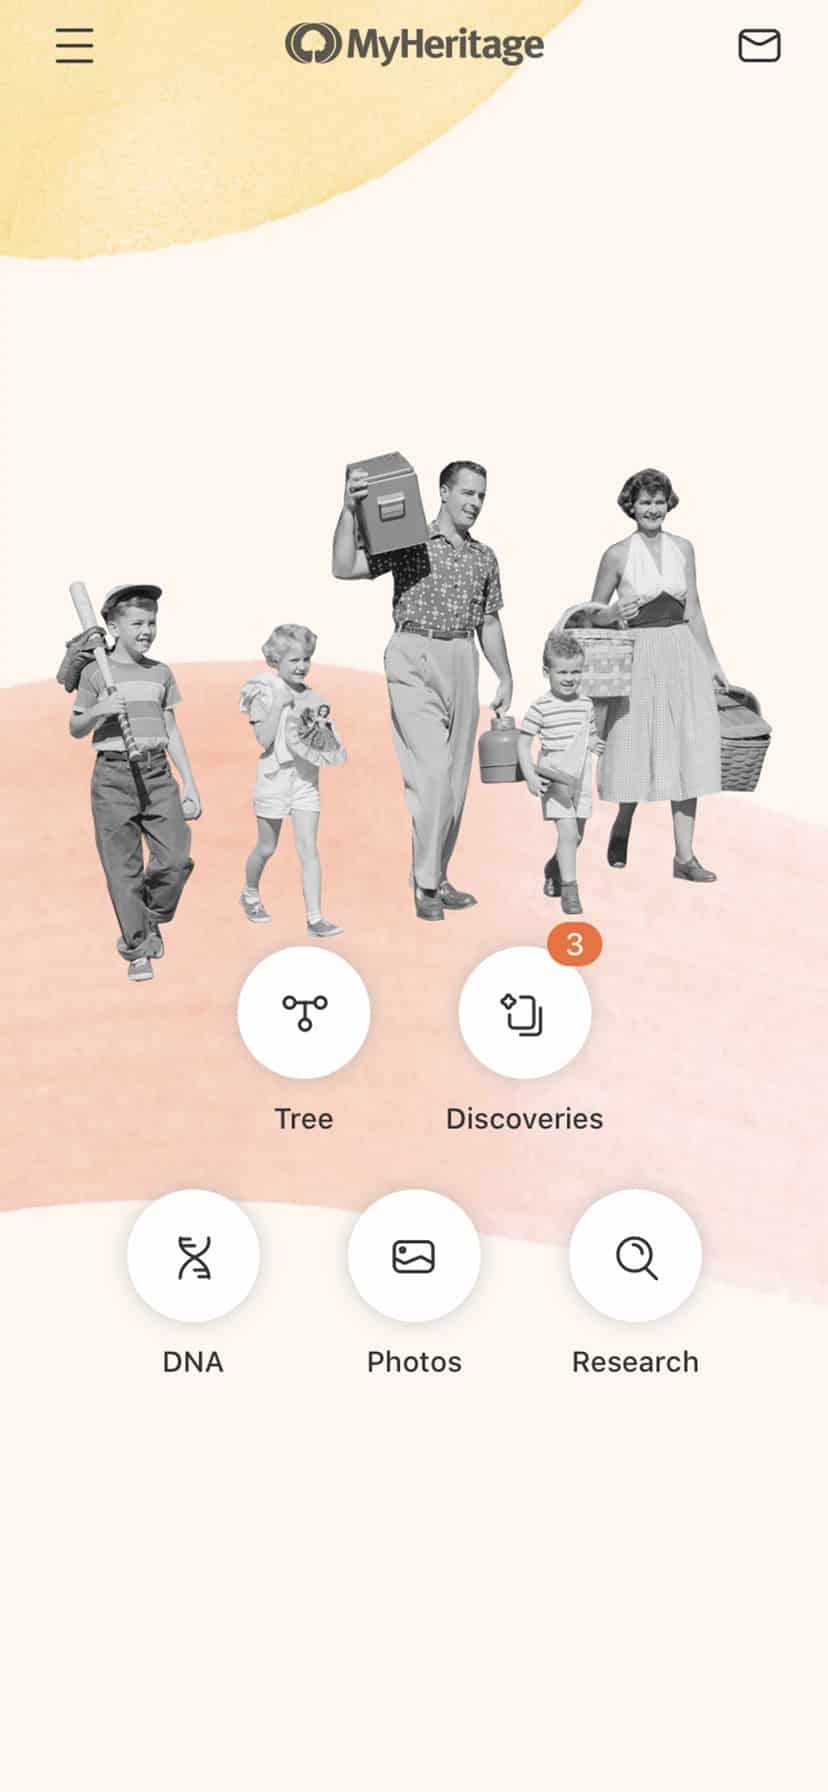 Home screen of the MyHeritage app